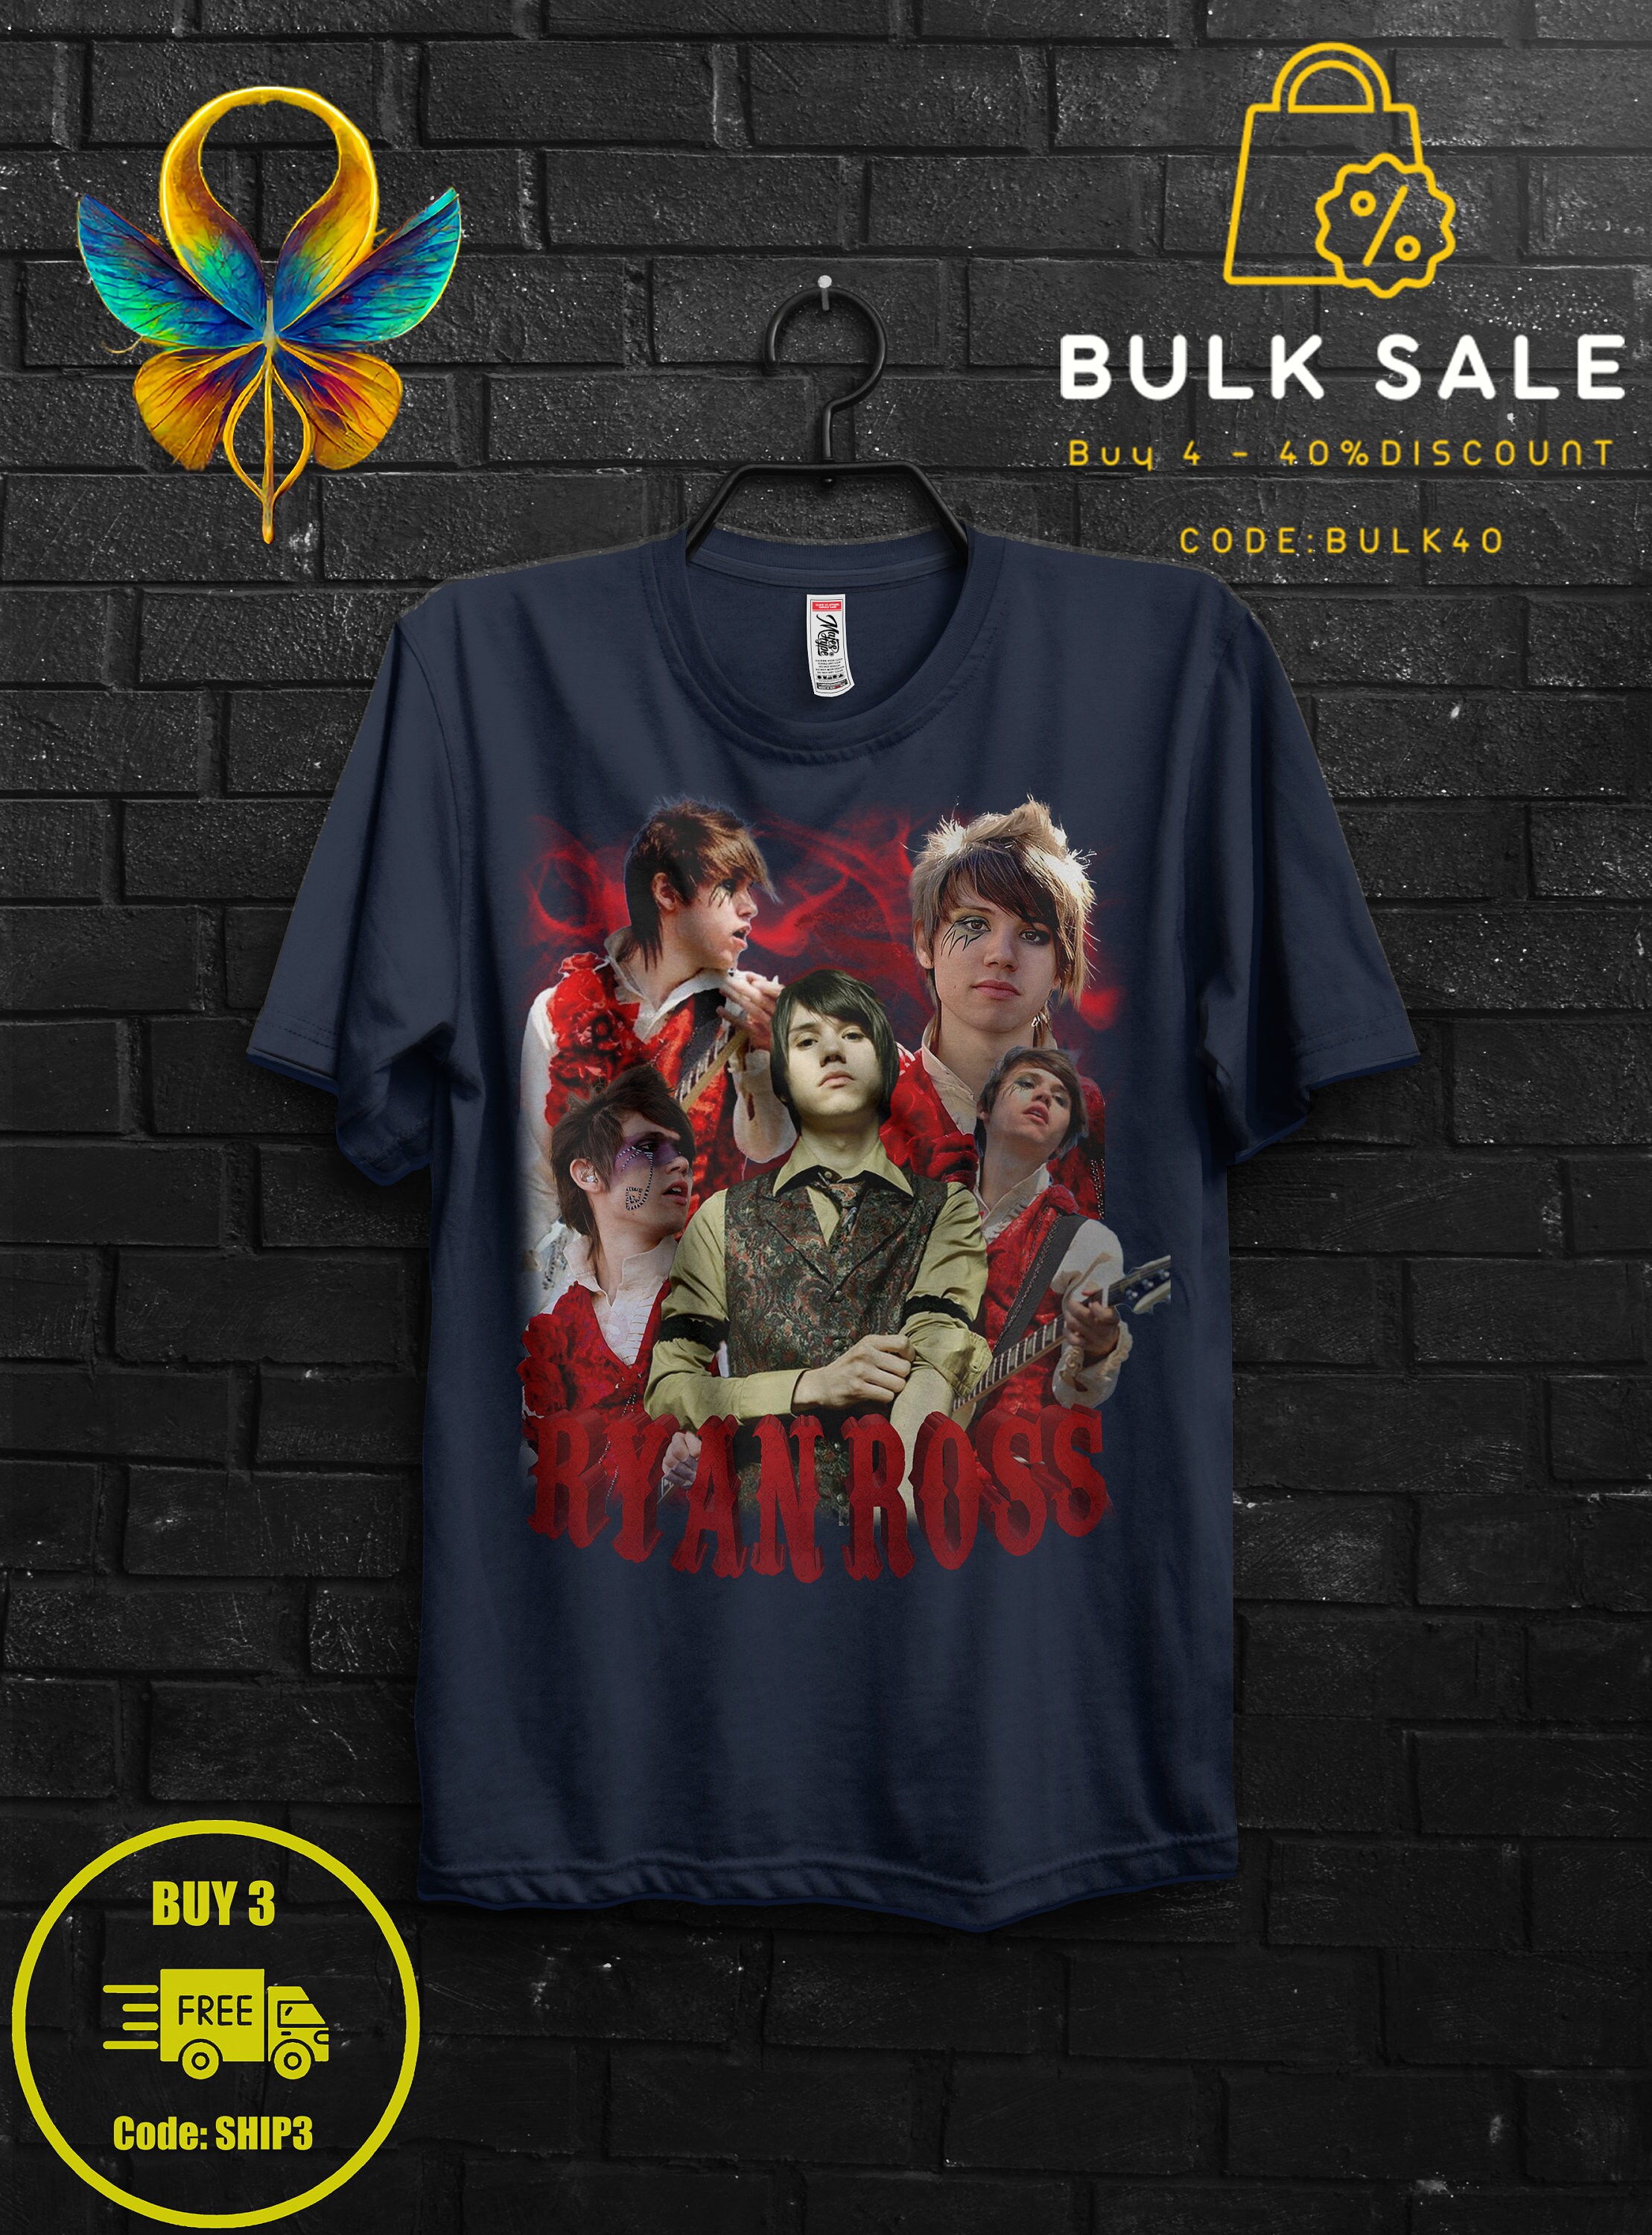 Ryan Ross Fan Gift TShirt,The Young Veins Emo Tee,Widespread Panic,Brendon Urie and John Walker Shirt,Afycso Appareal,Too Weird To Live Band 1560941331